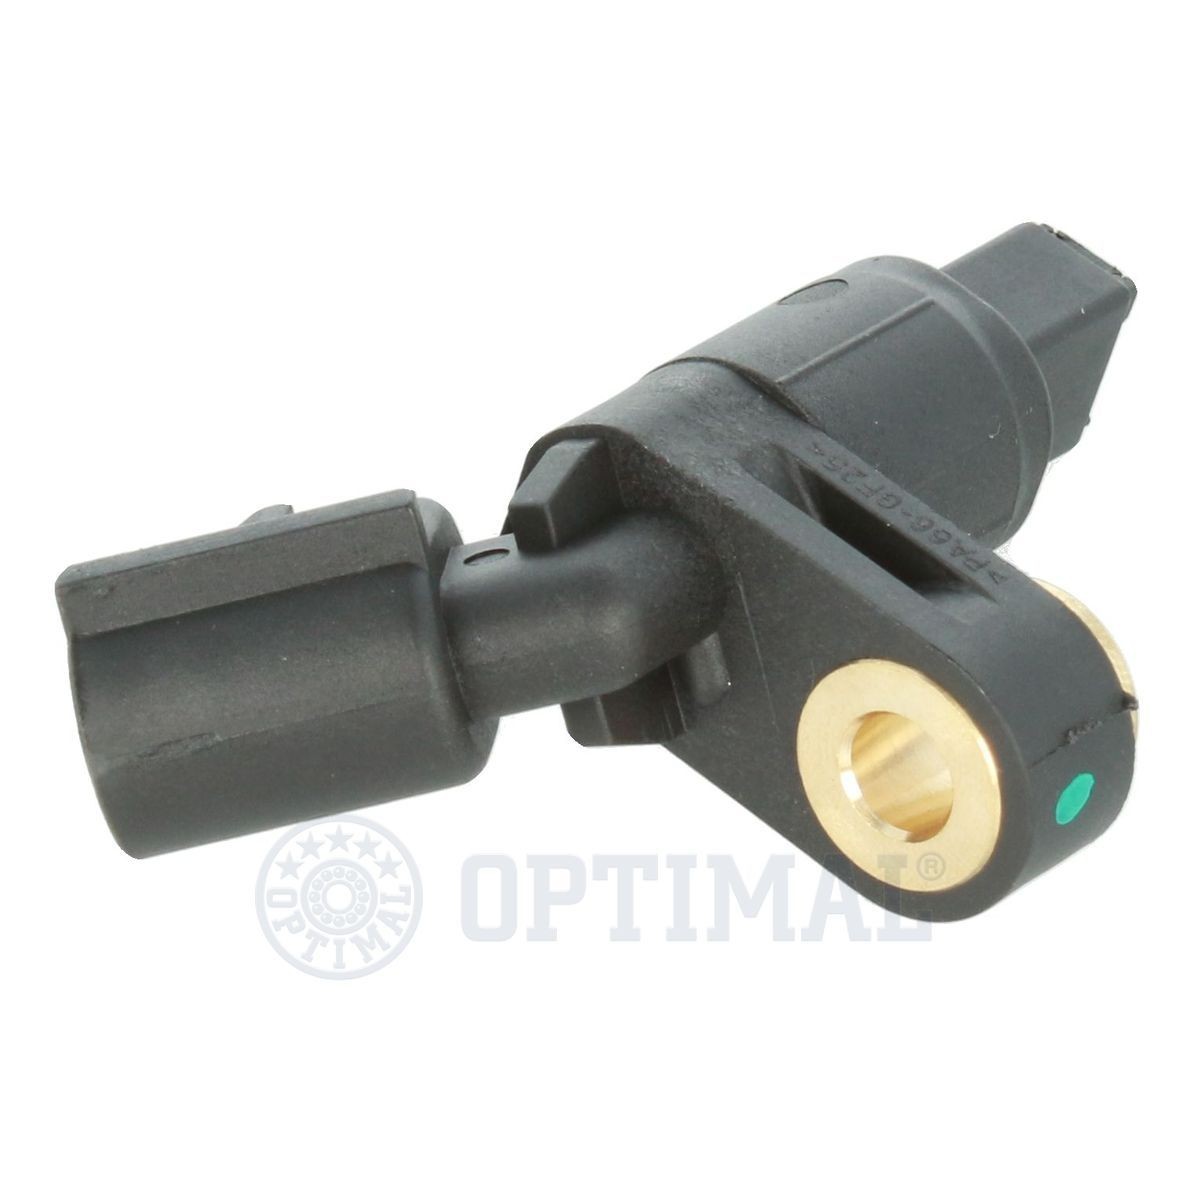 06-S043 OPTIMAL ABS sensor without cable, Passive sensor, 27,7mm